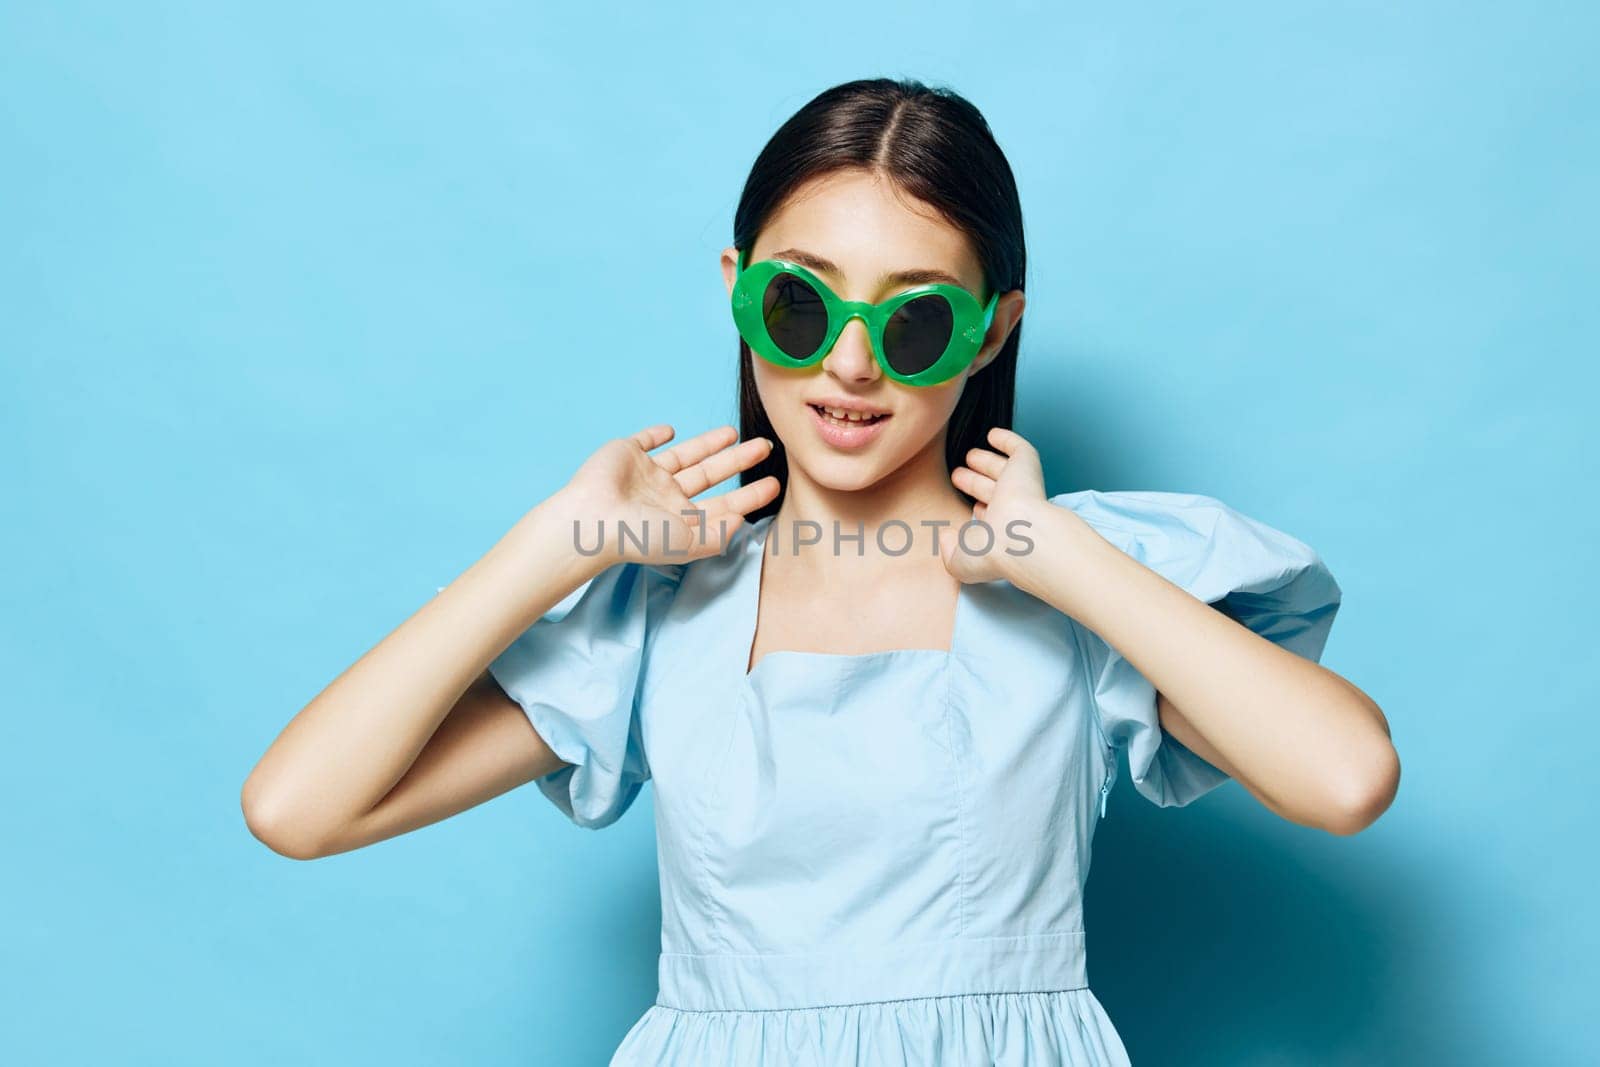 lifestyle woman beautiful studio dance fashionable isolated lady summer beauty vogue model blue dress attractive female hair young style background fashion